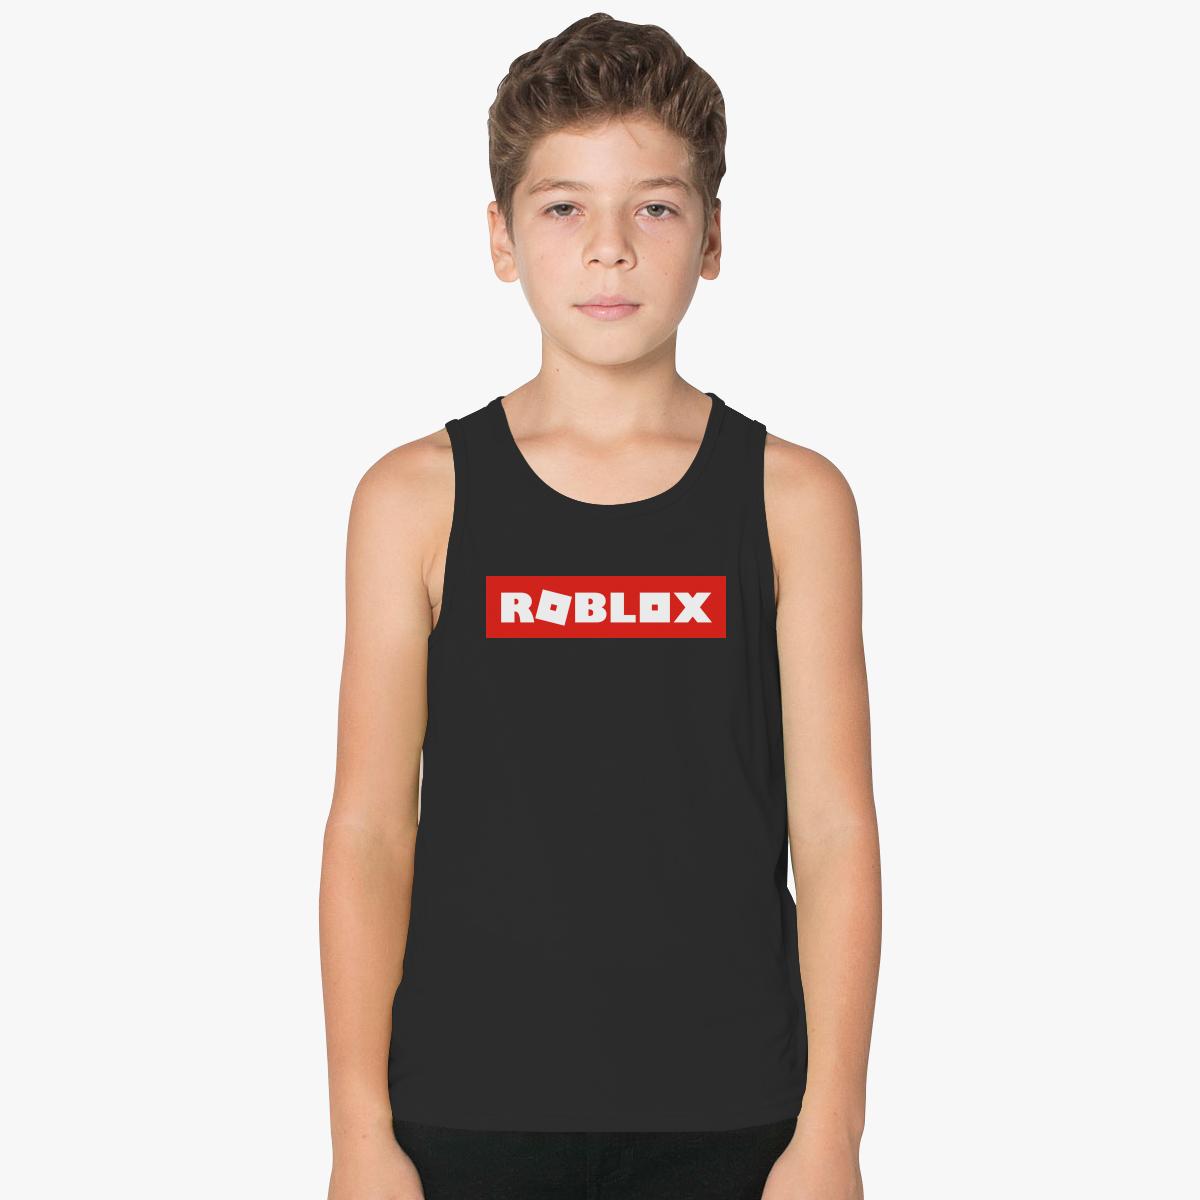 How To Make T Shirts In Roblox Toffee Art - how do you make t shirts on roblox toffee art